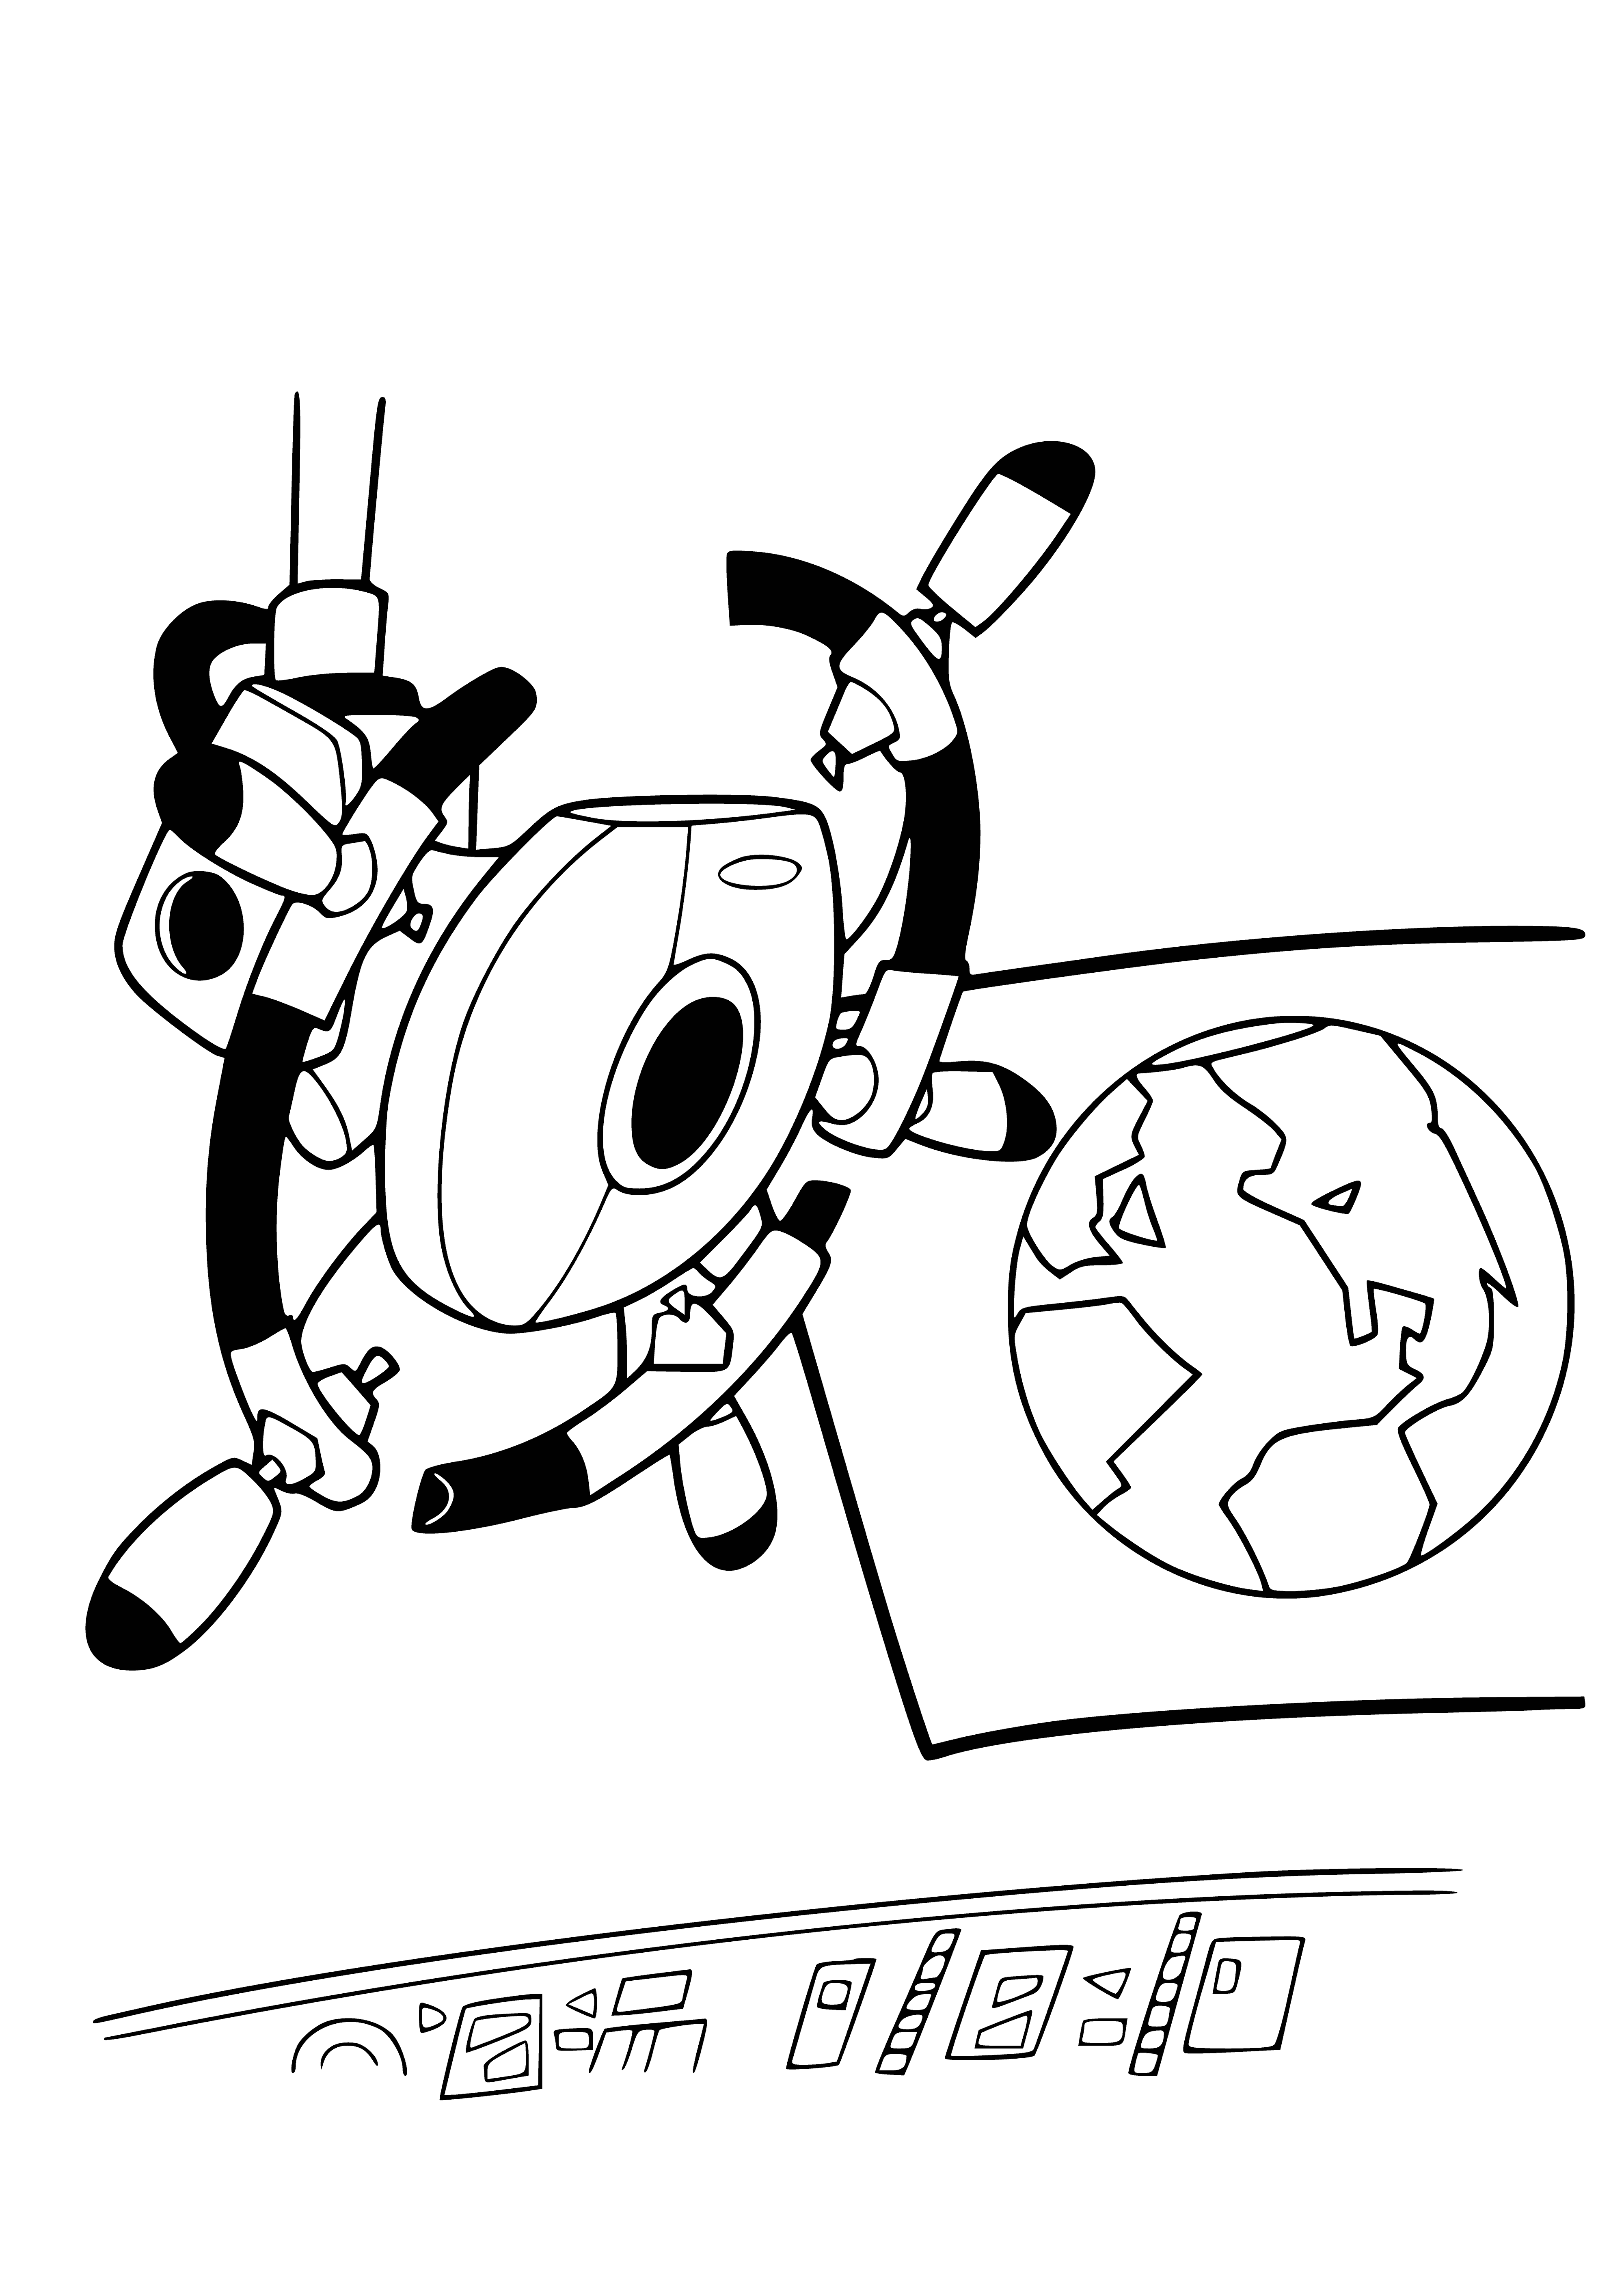 coloring page: A small robot, Wall-E, surrounded by a rocky, dusty environment, has a big head, thin body, thin arms & legs, and small treads on his feet. A bright green coloring page in the center & blue sky in the background.